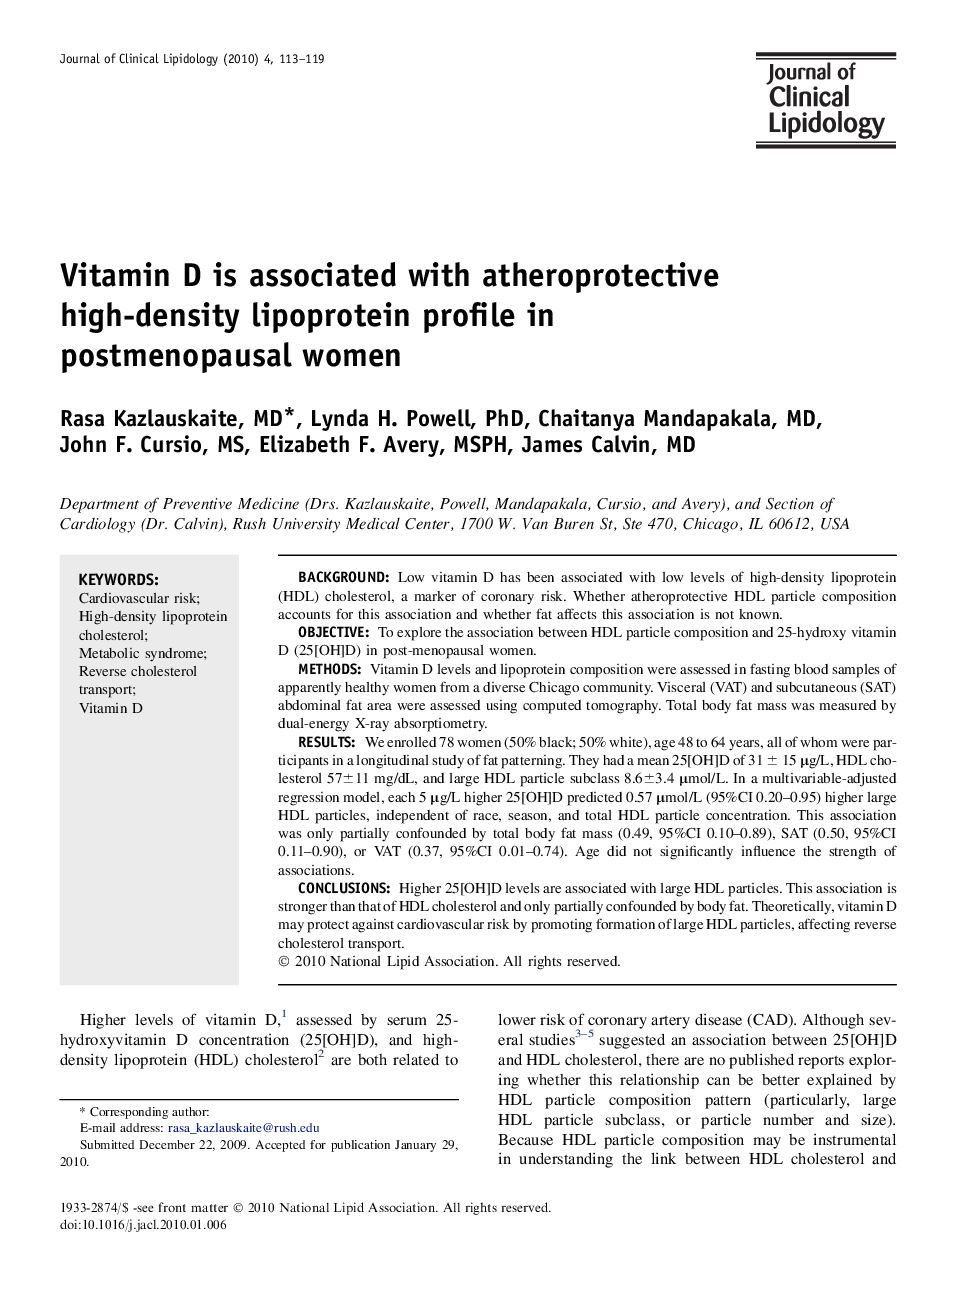 Vitamin D is associated with atheroprotective high-density lipoprotein profile in postmenopausal women